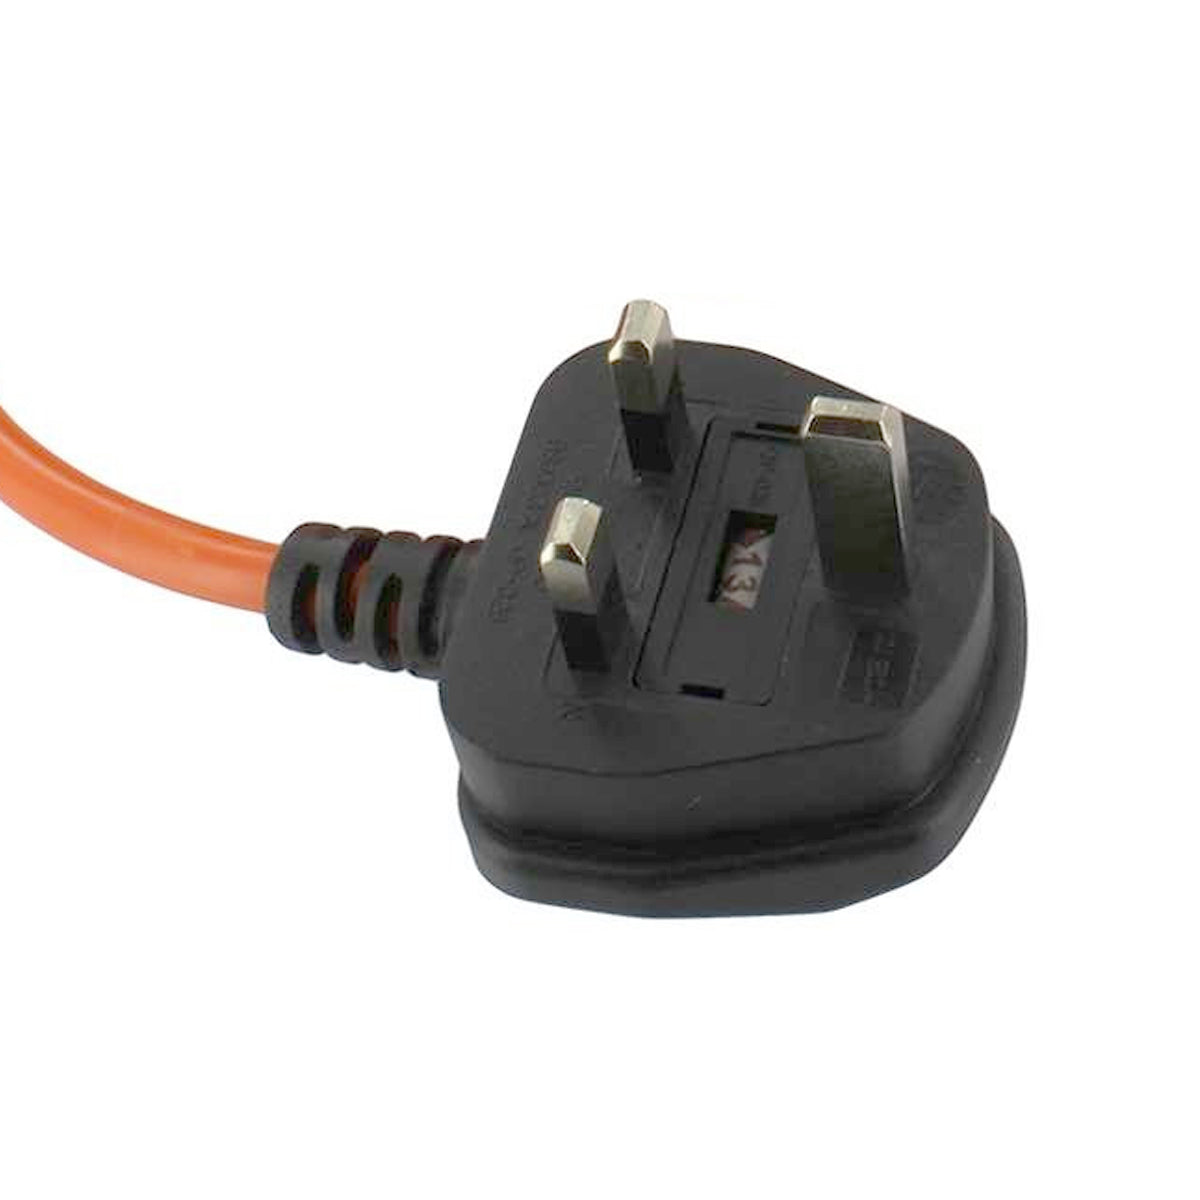 12m Power Cable For Flymo Glide Master 340 380 Lawnmower Extra Long Lead Plug